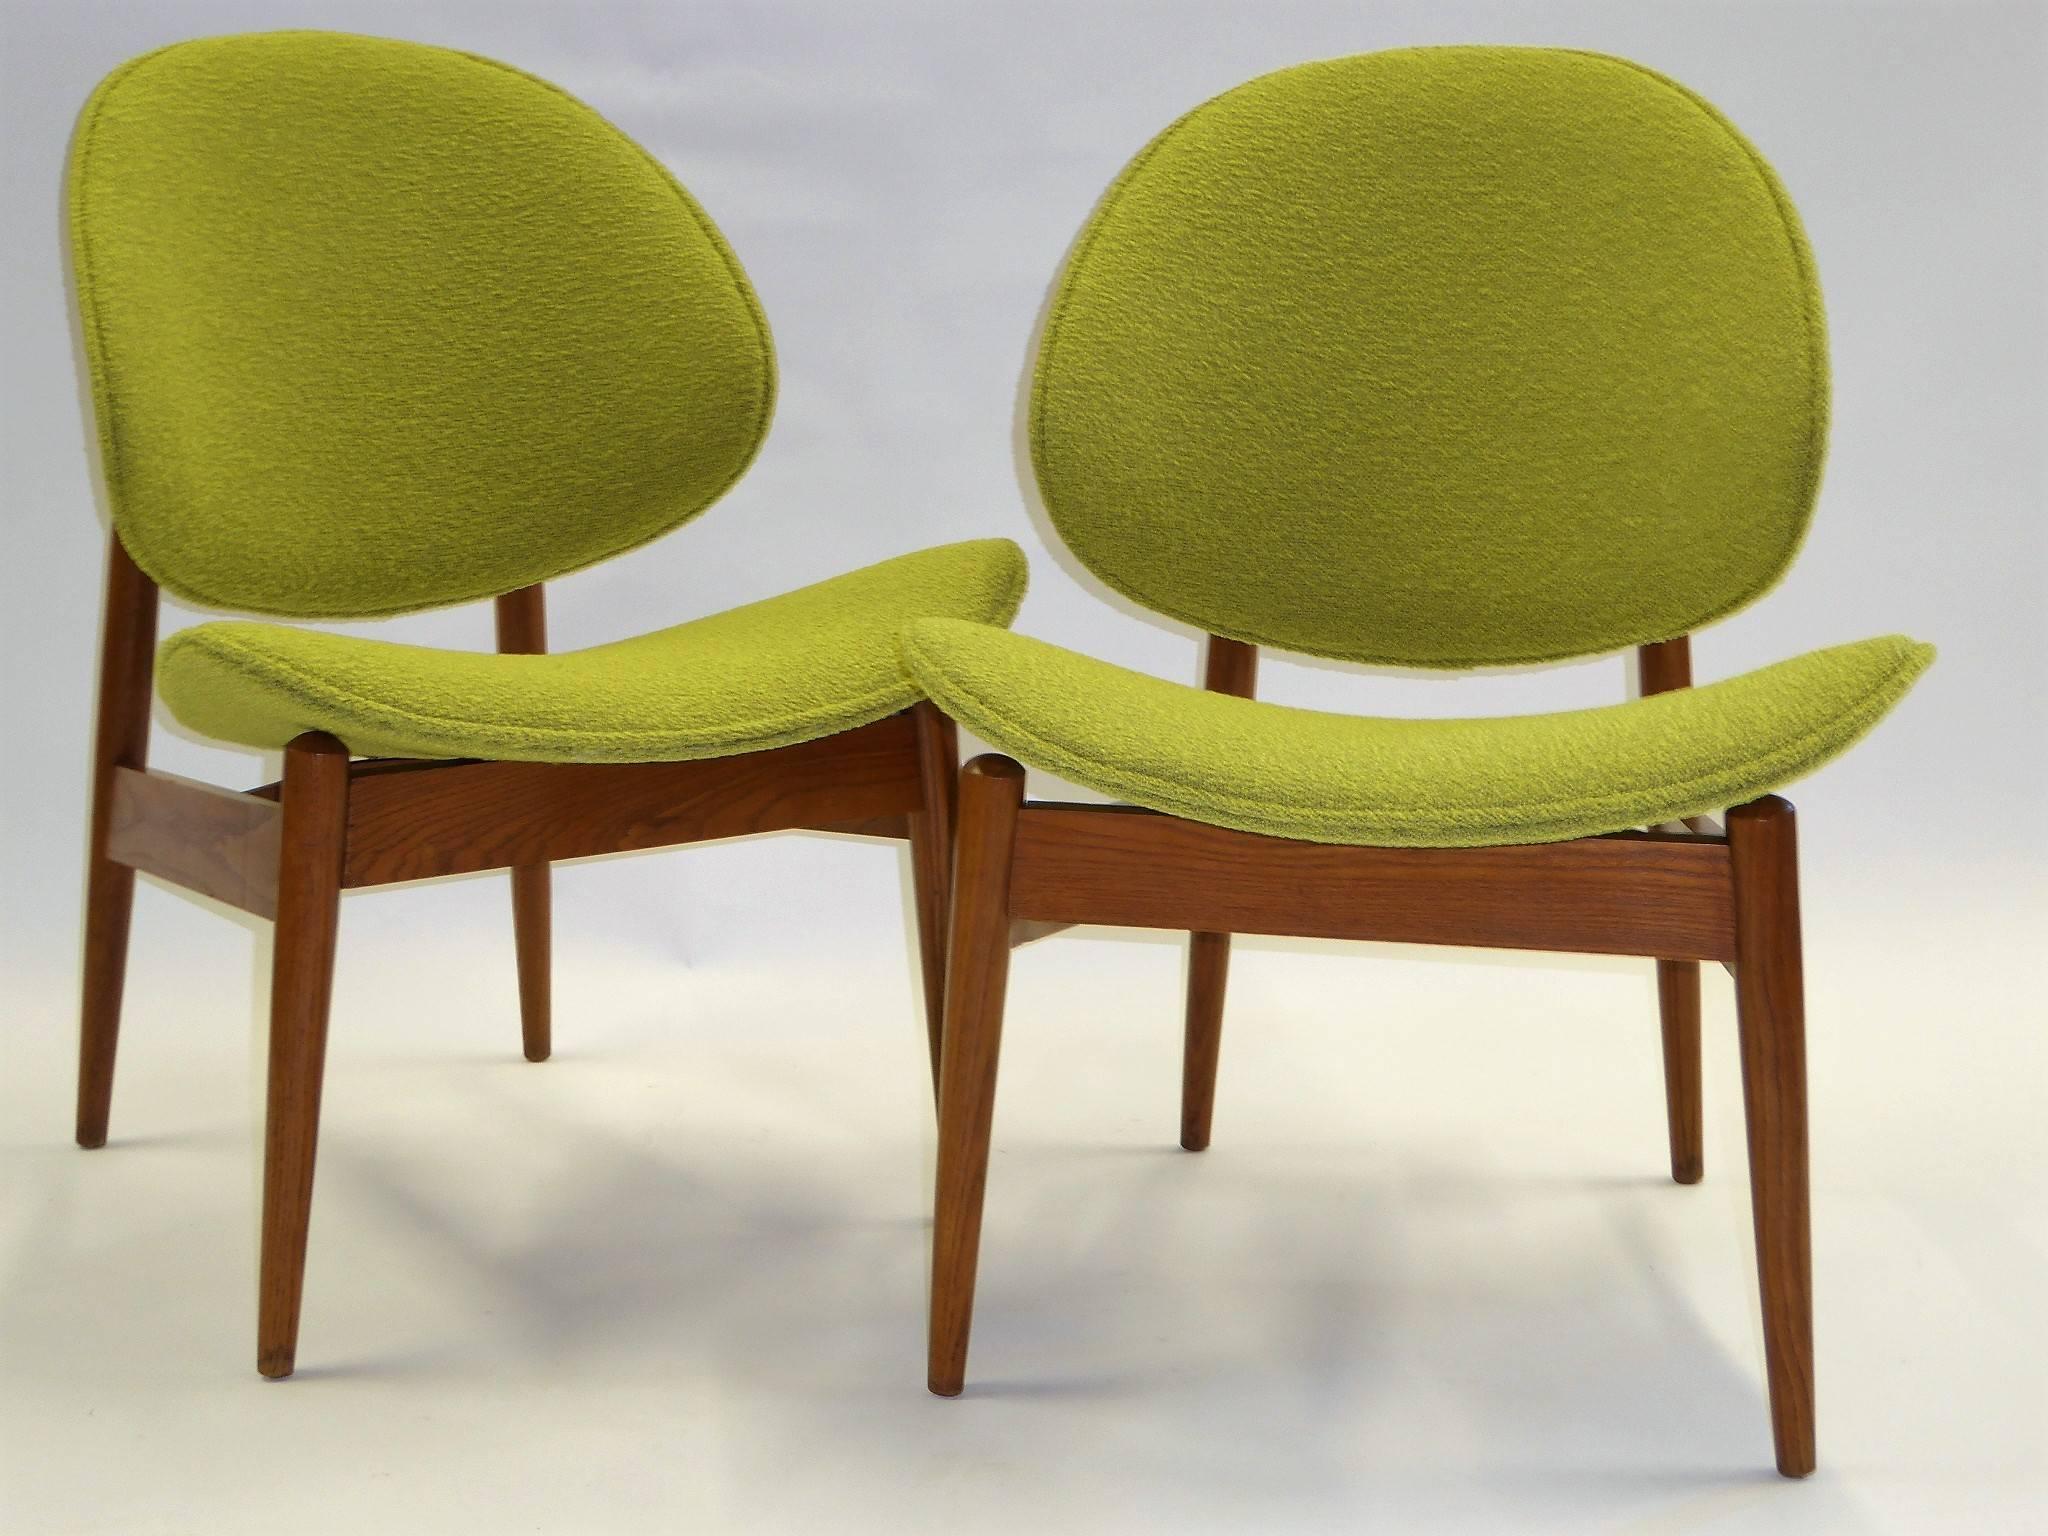 Early 1950s clam shell chairs designed and patented by Seymour James Weiner for his Miami company Kodawood. Beautiful walnut bentwood and lathe turned, they have distinctive shaping. Newly upholstered in a green bouclé weave. Yummy! Last name